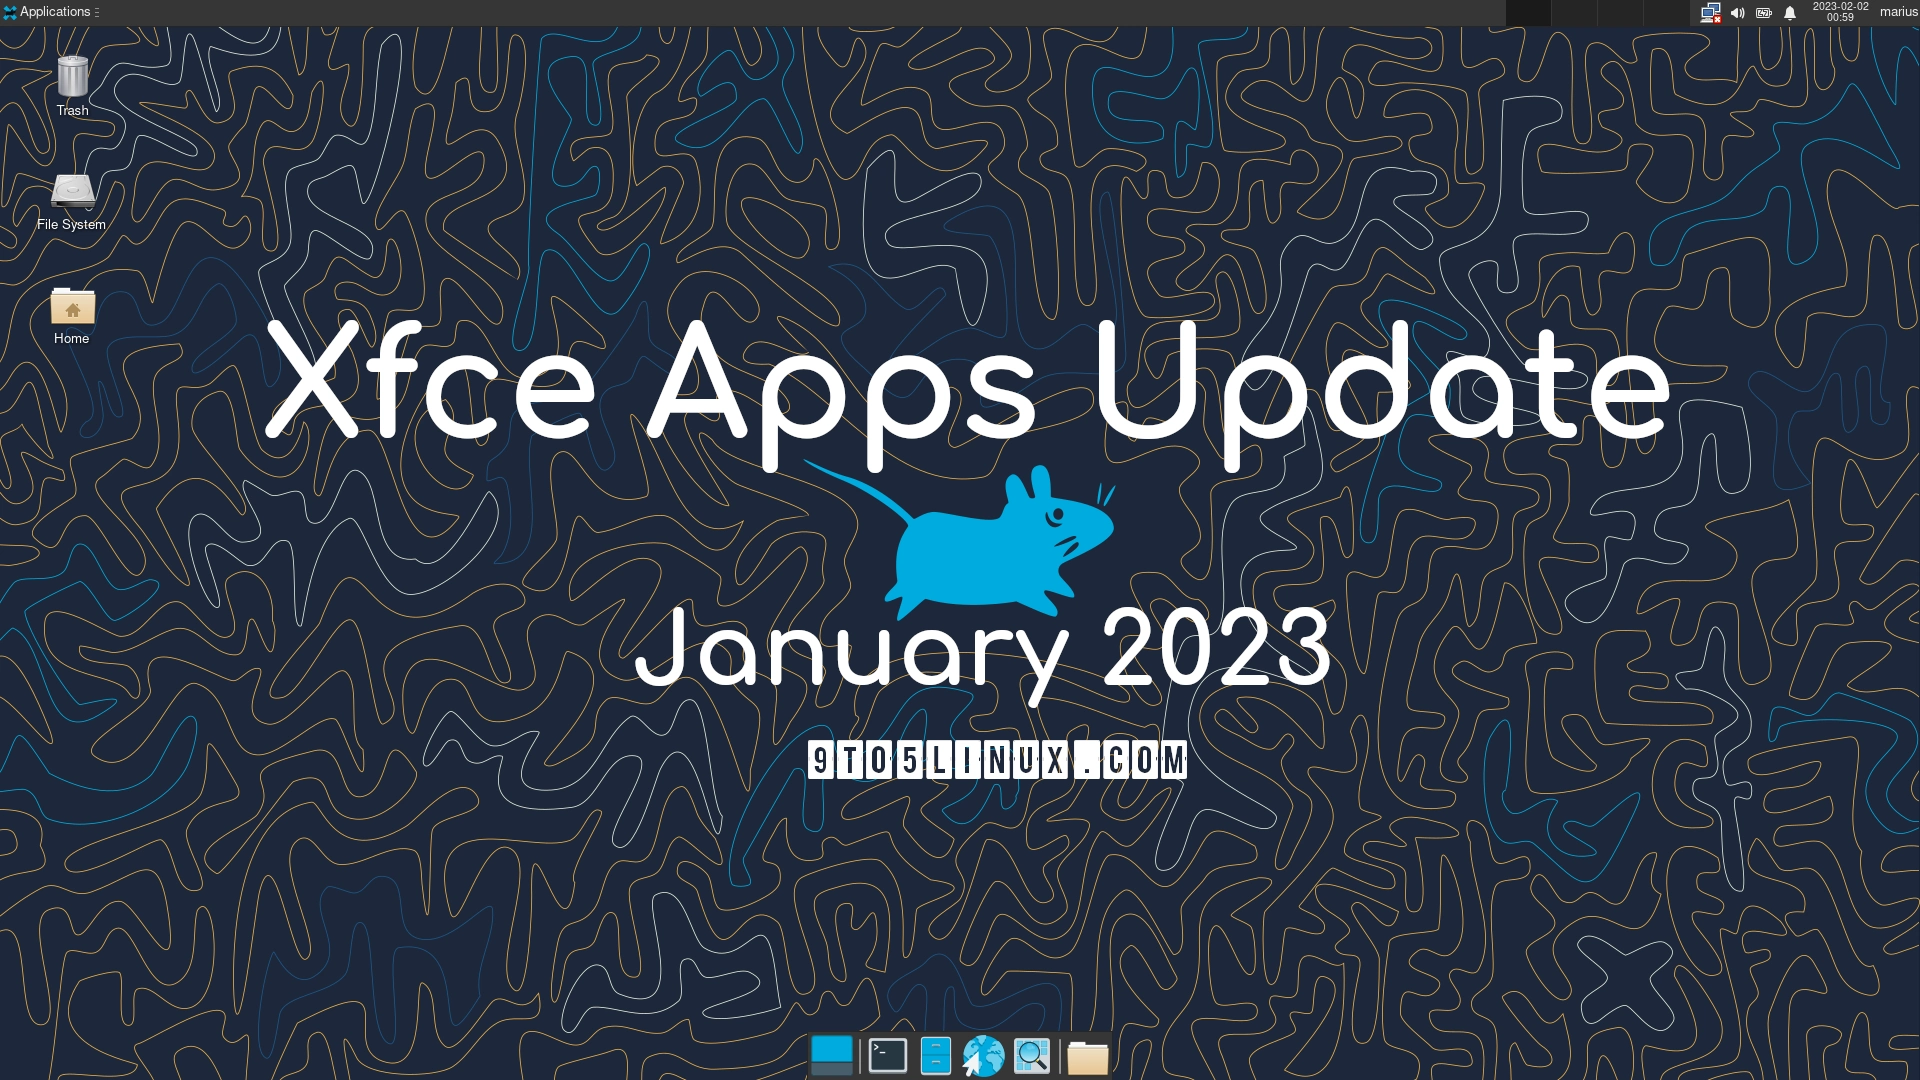 Xfce’s Apps Update for January 2023: New Releases of Thunar, Xfce Panel, and Whisker Menu